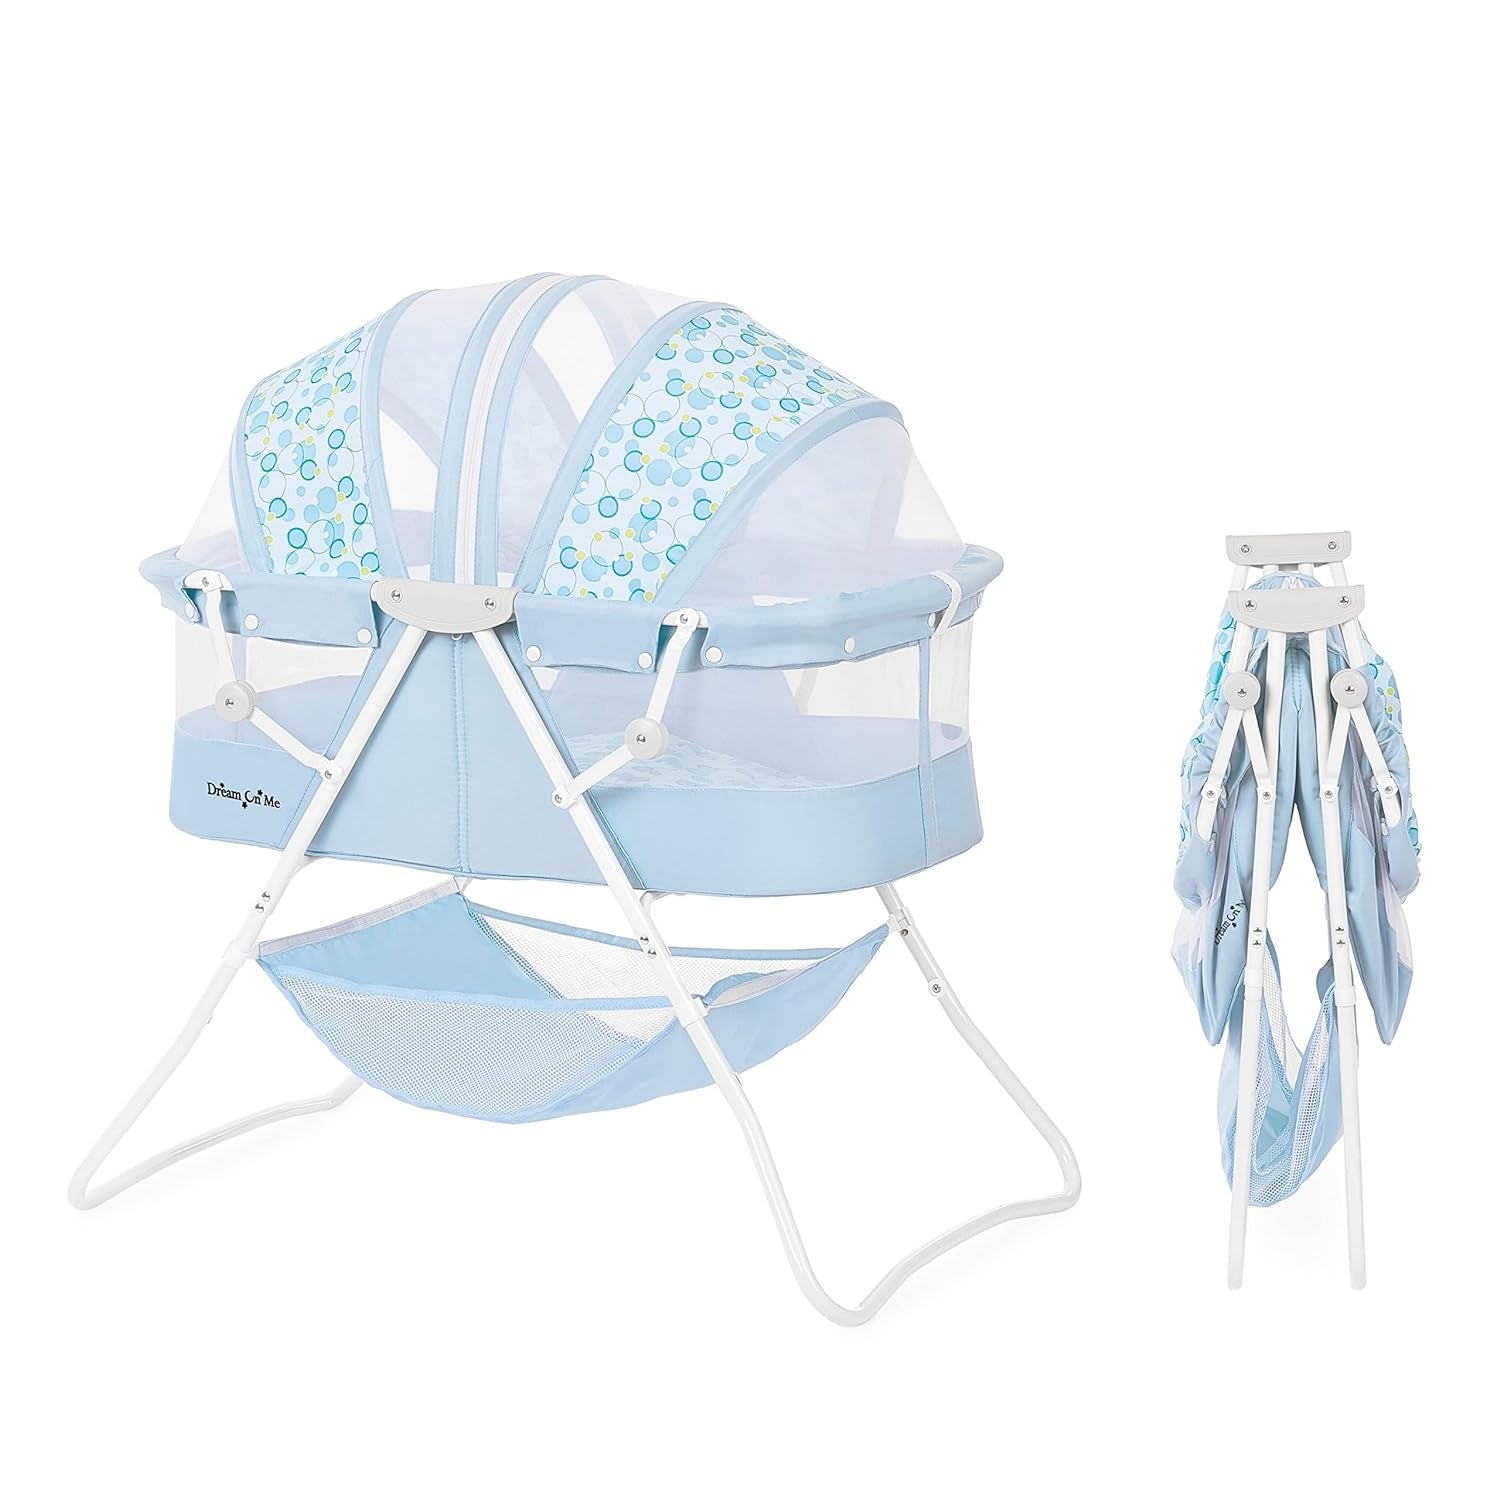 Karley Bassinet in Light Blue, Lightweight Portable Baby Bassinet, Quick Fold and Easy to Carry, Adjustable Double Canopy, Indoor and Outdoor Bassinet with Large Storage Basket. - Design By Technique